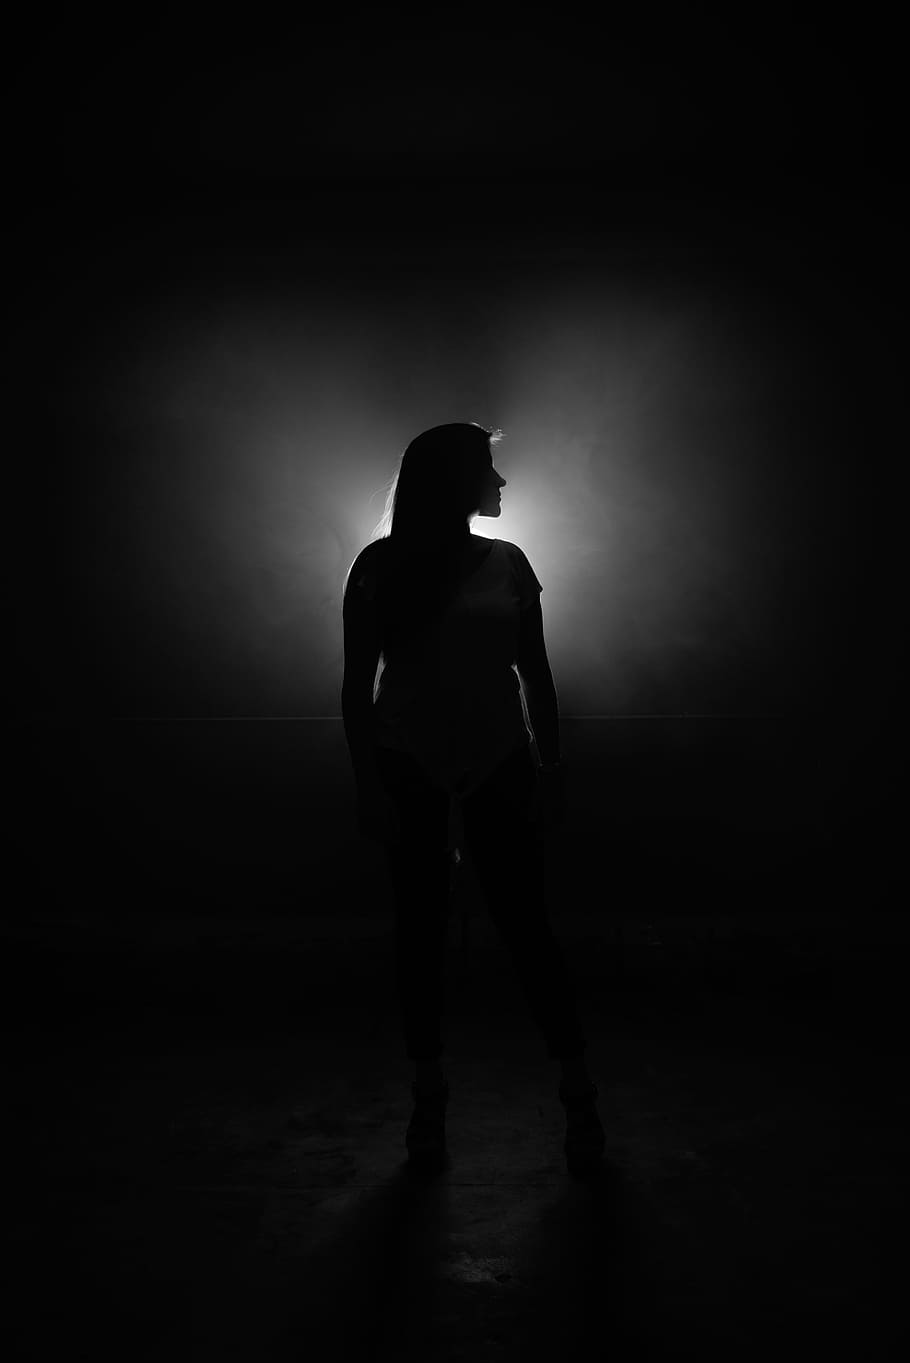 dark, creepy, people, woman, girl alone, silhouette, black and white, light, spooky, one person